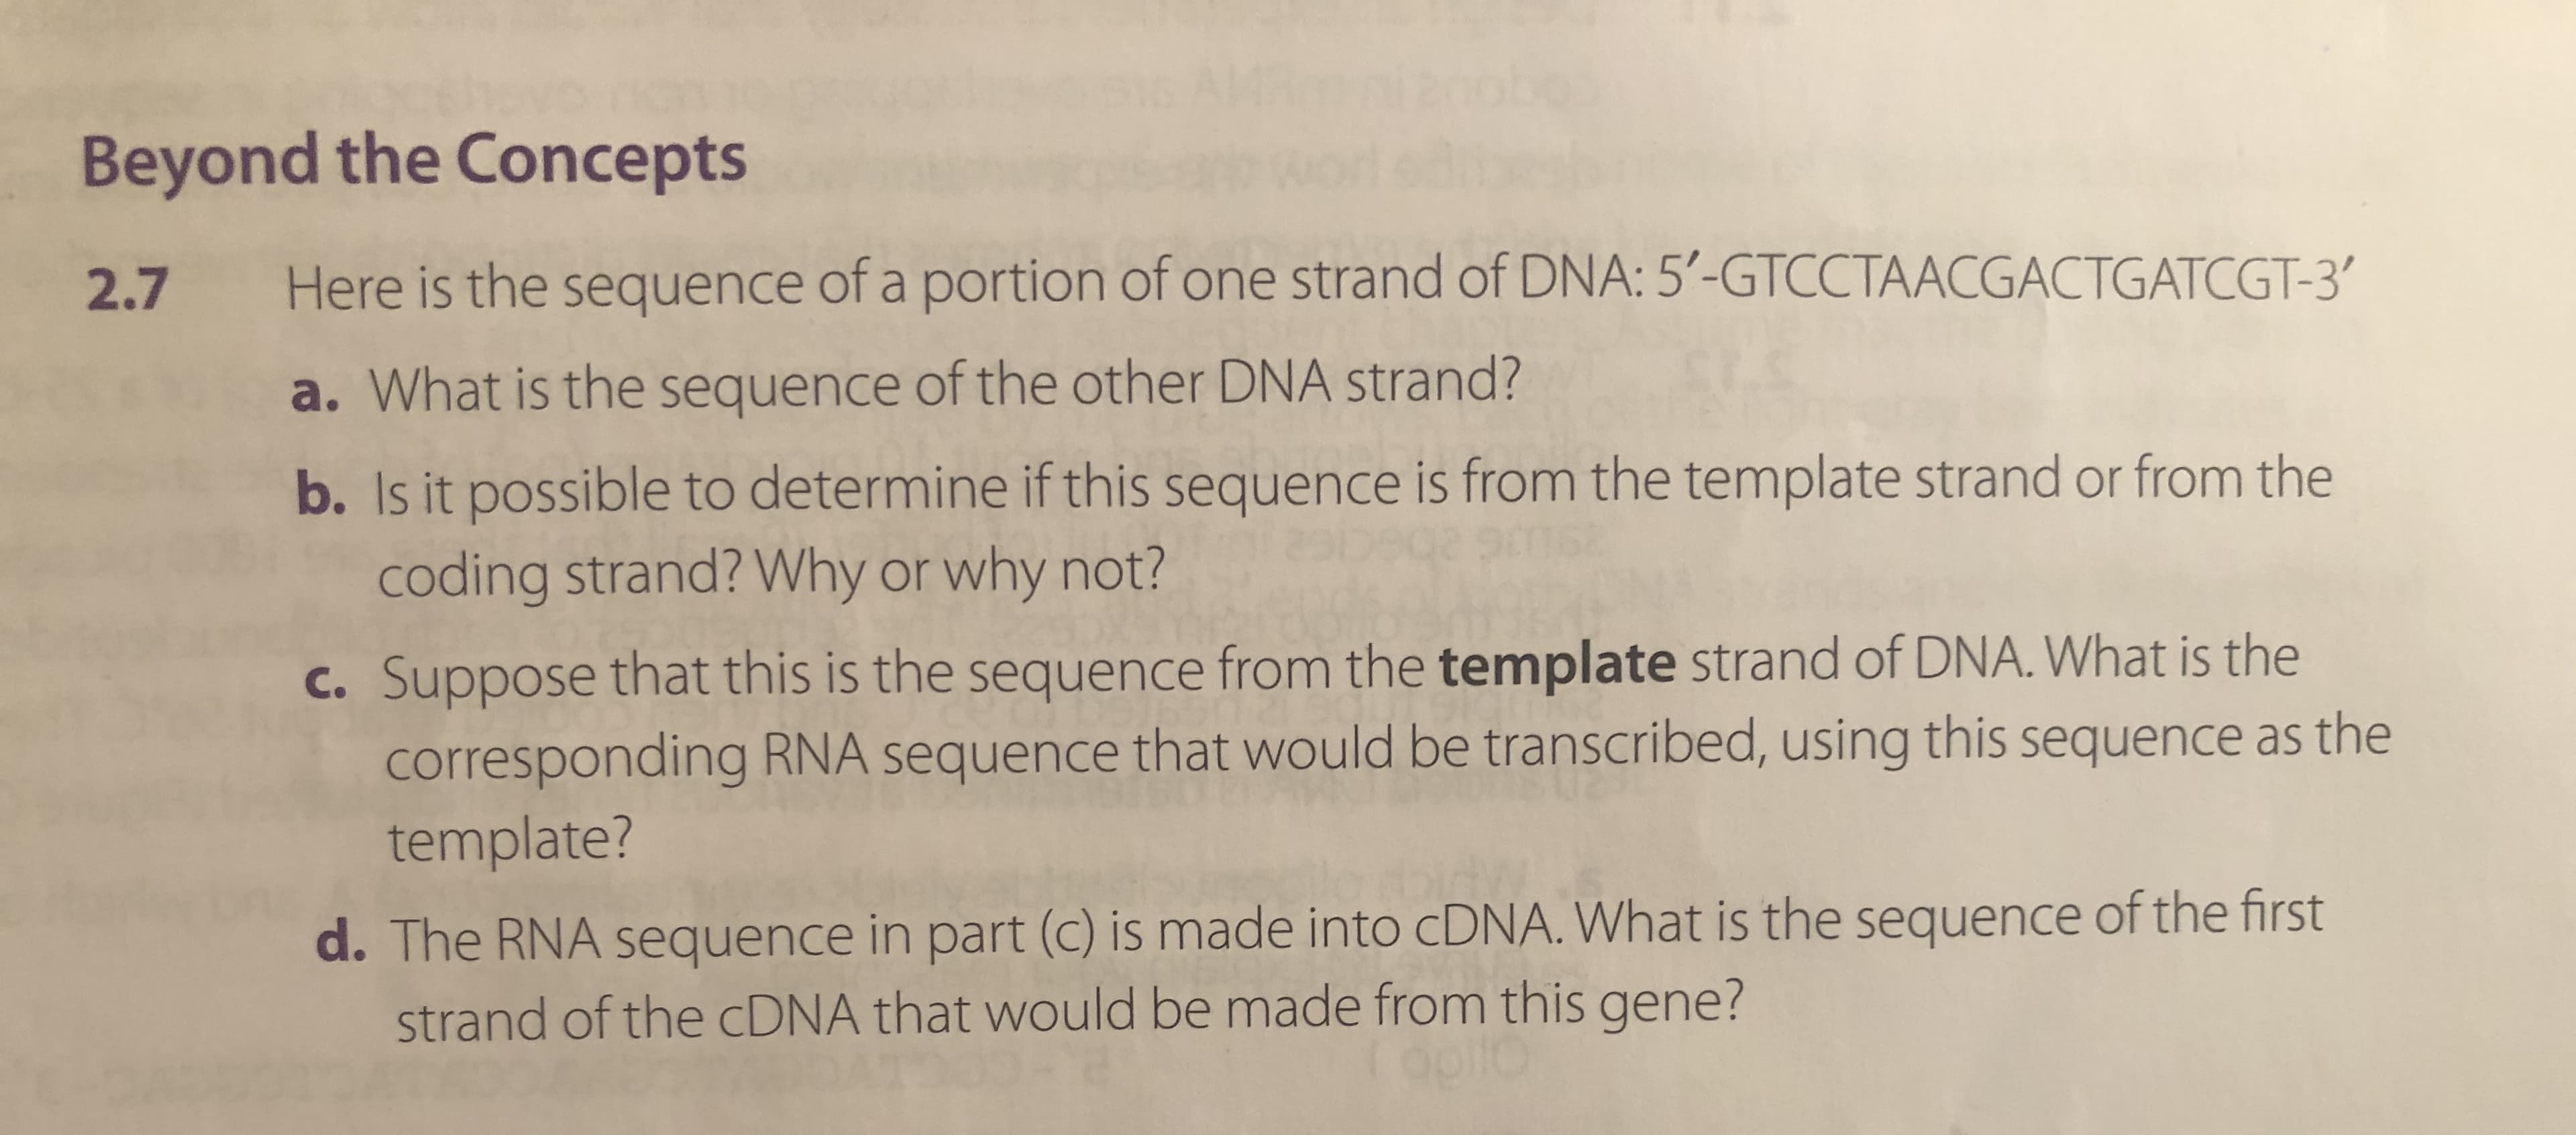 Here is the sequence of a portion of one strand of DNA: 5'-GTCCTAACGACTGATCGT-3'
a. What is the sequence of the other DNA strand?
b. Is it possible to determine if this sequence is from the template strand or from the
coding strand? Why or why not?
